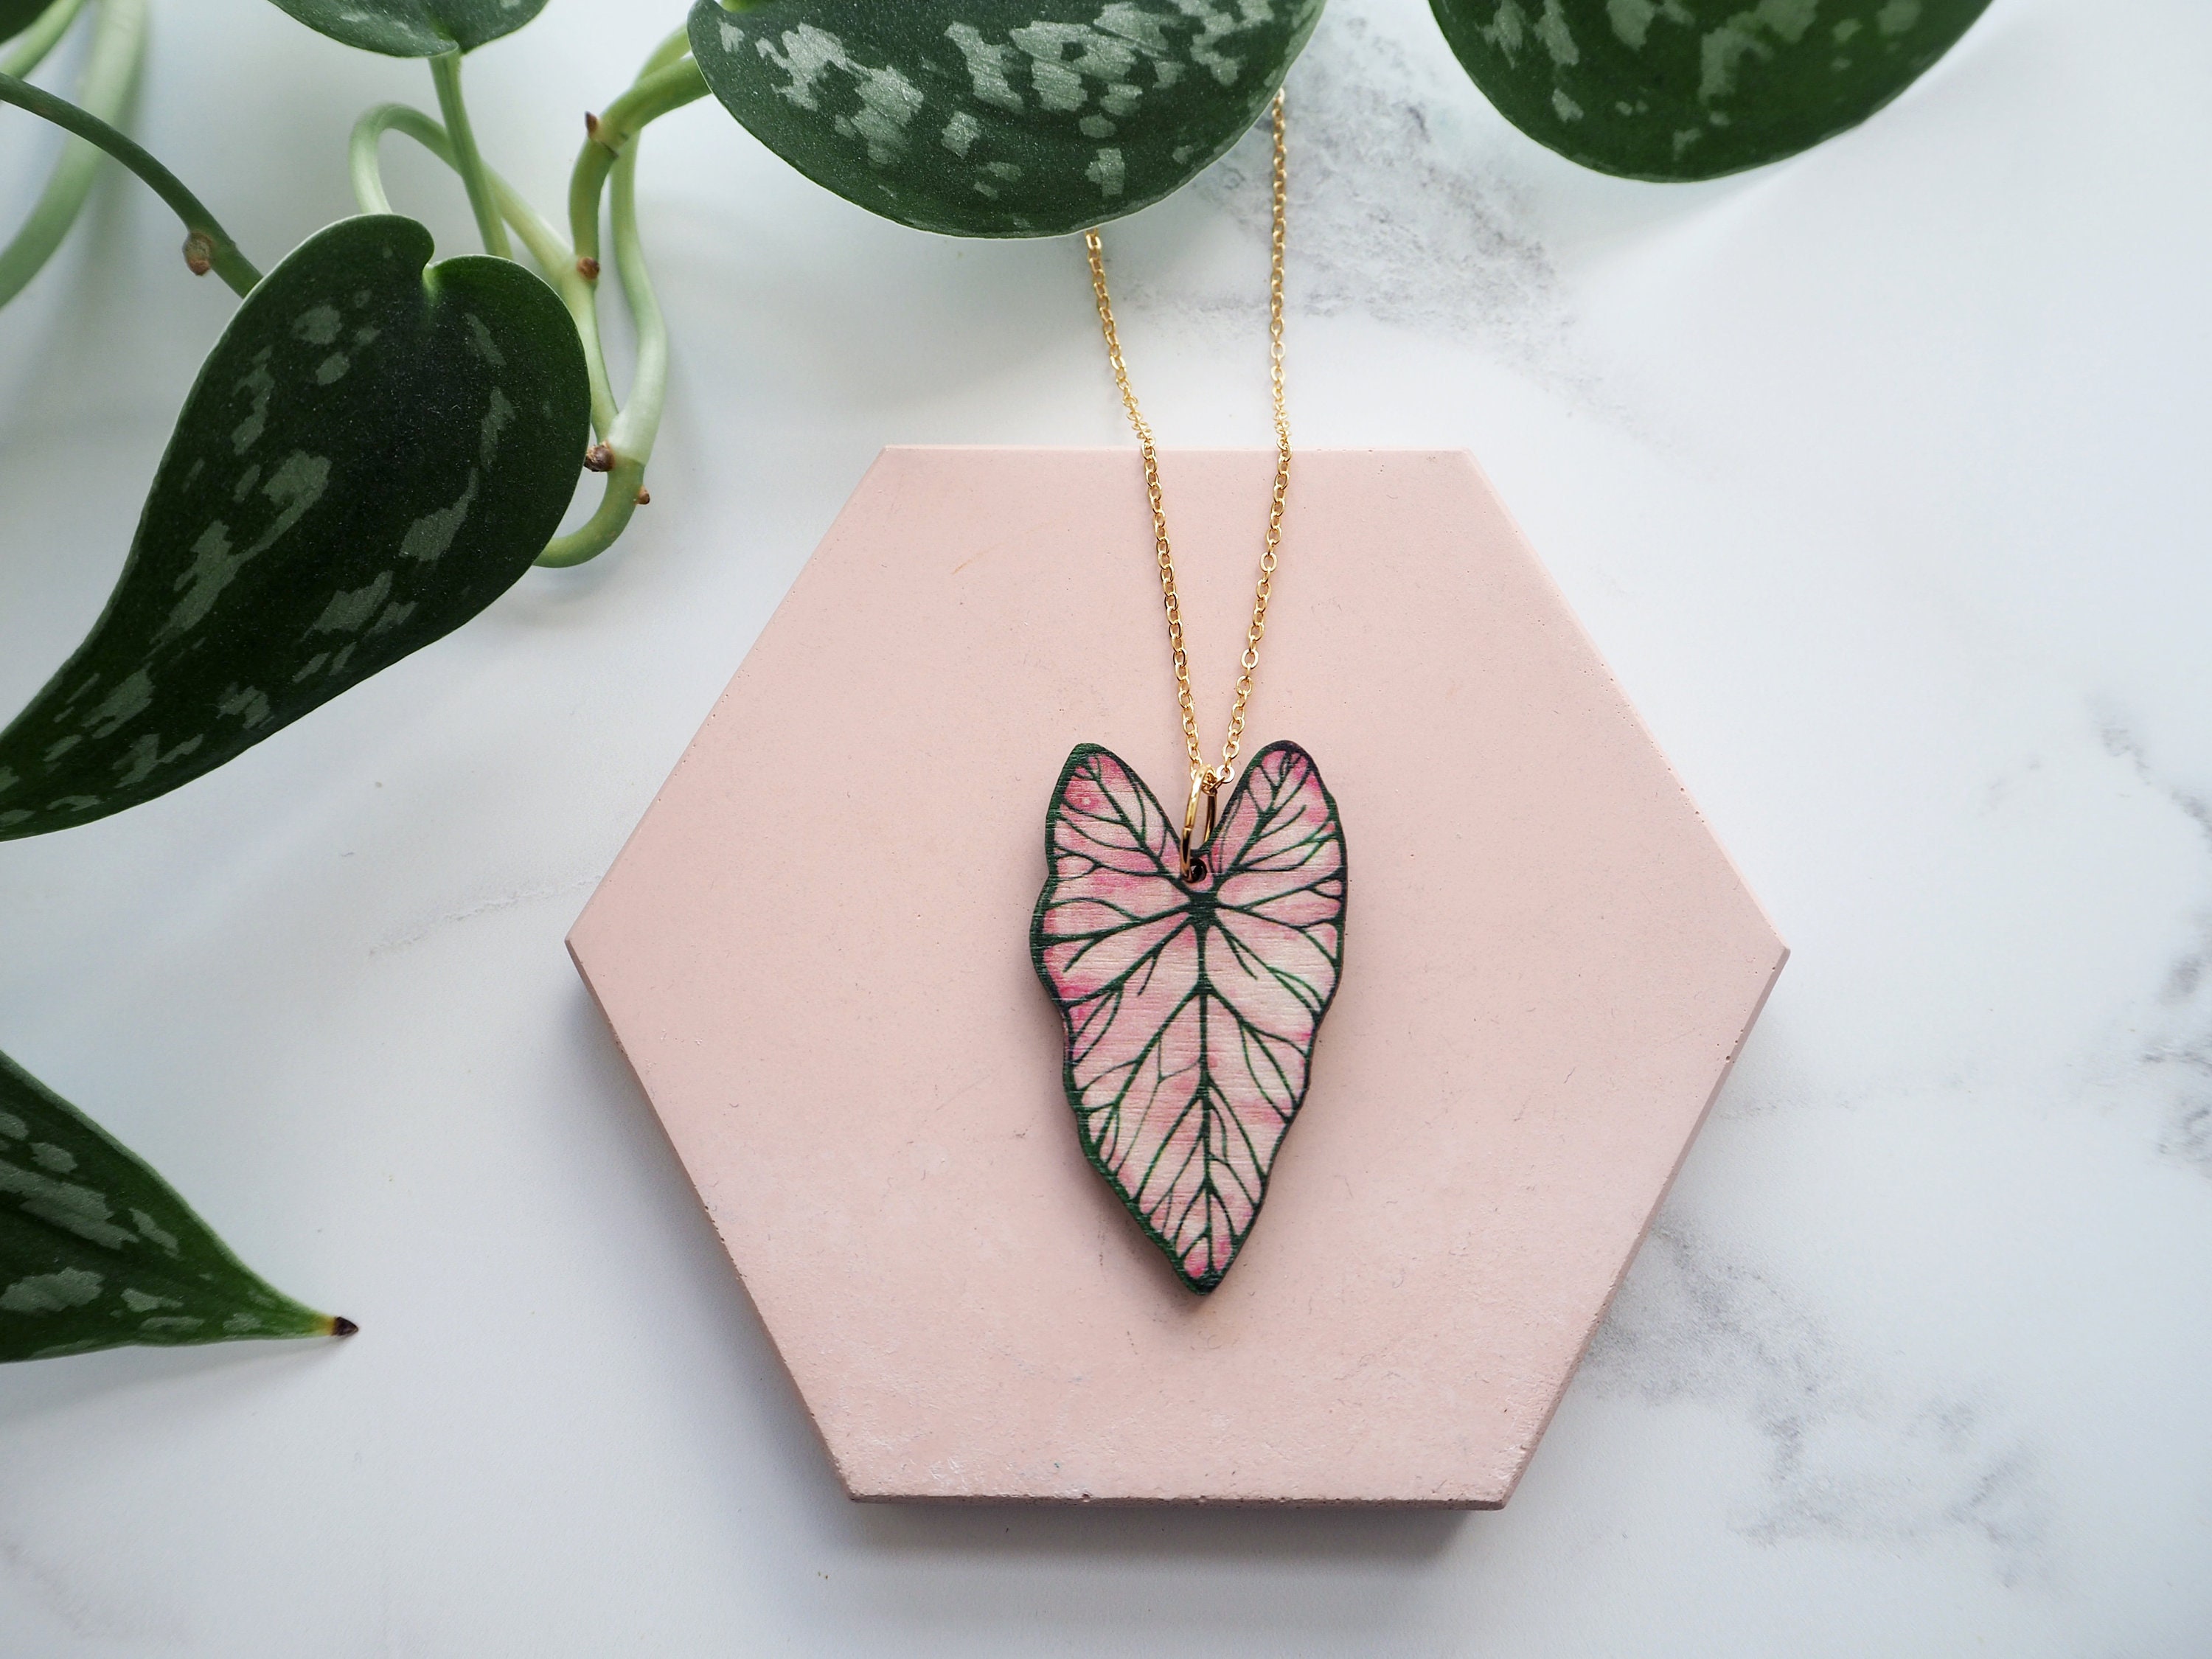 Tropical Necklace - Plant Pink Leaf Pendant Jewellery Botanical Gift For Her Caladium